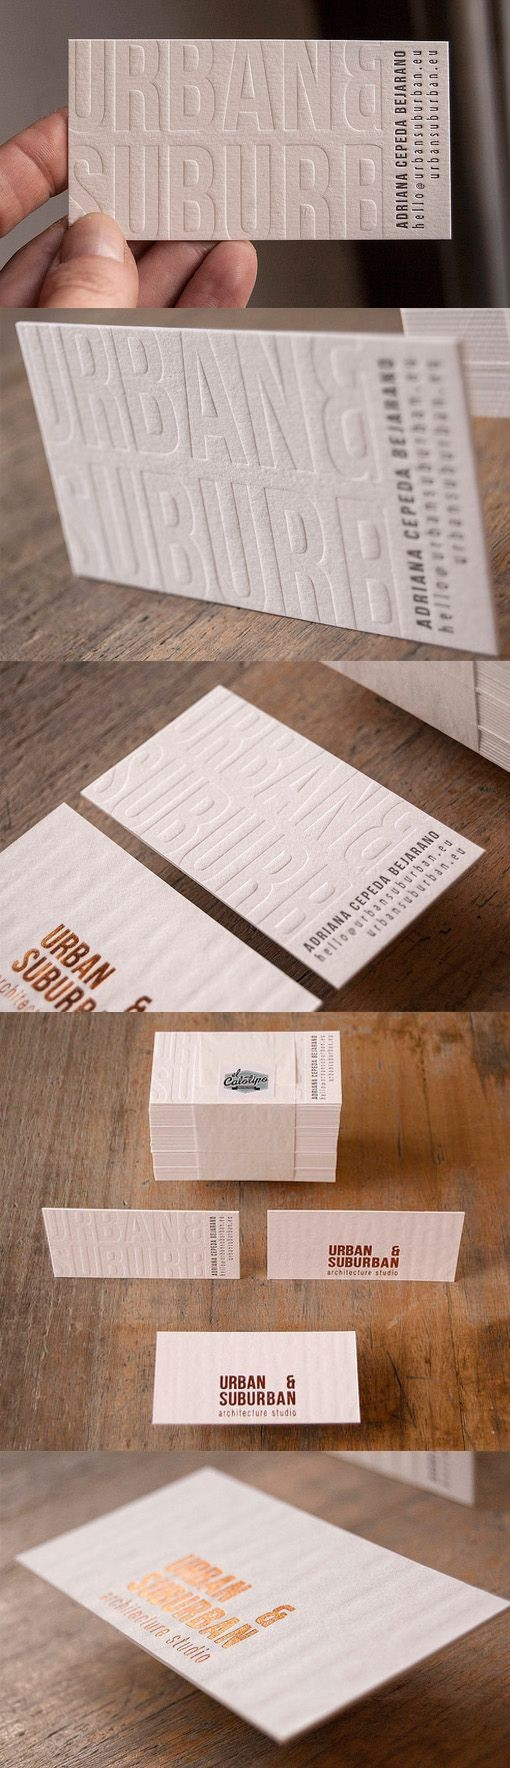 26 Fashionable Hardwood Flooring Business Cards 2024 free download hardwood flooring business cards of flooring business card luxury business cards logo ideas new sample intended for flooring business card fresh 20 inspirational flooring business cards pute